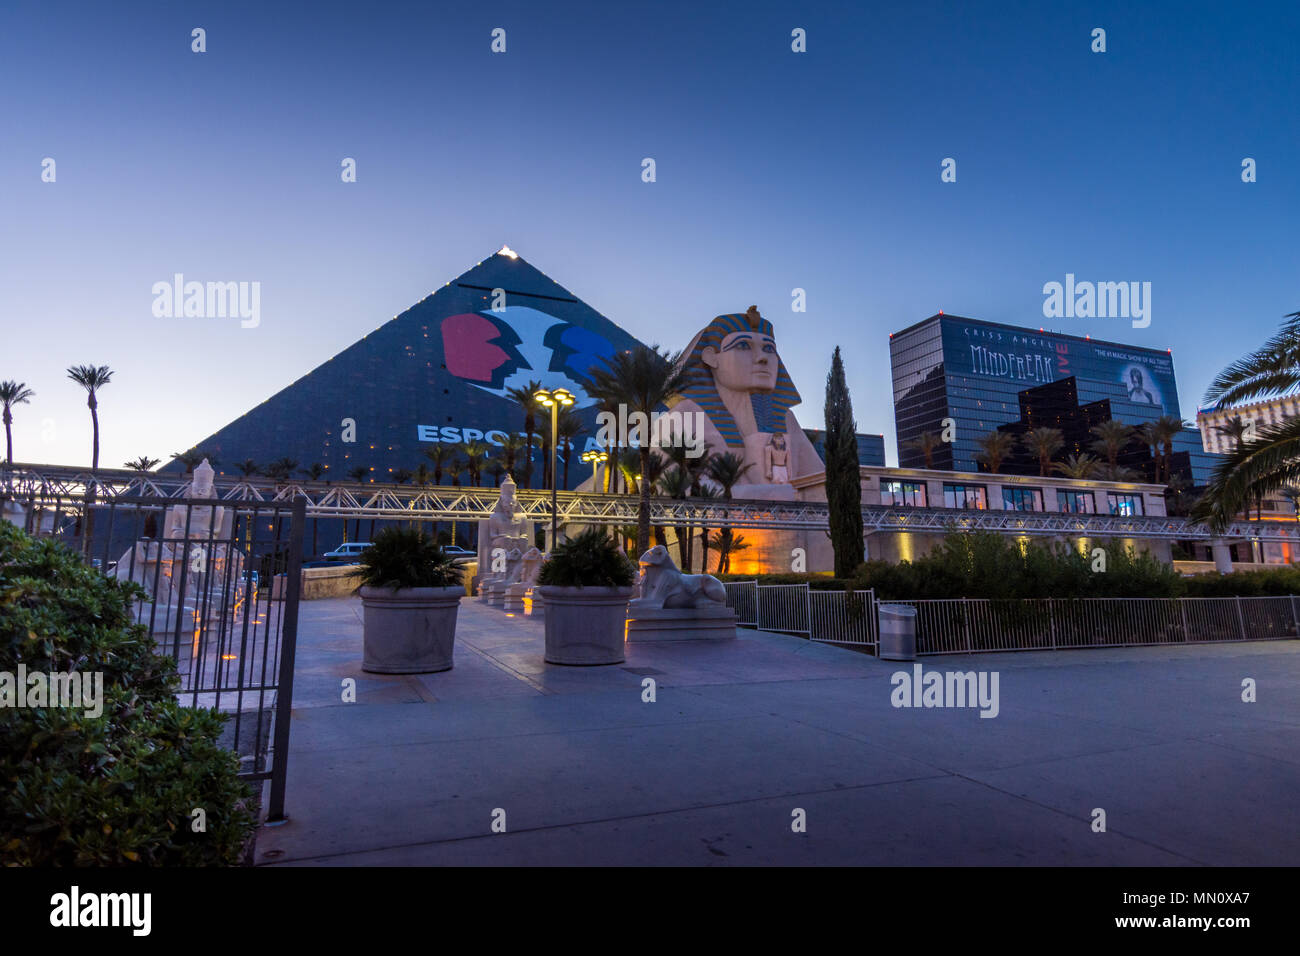 Las Vegas, US - April 28, 2018: The famous Luxor pyramid hotel in Las vegas as seen at dusk Stock Photo